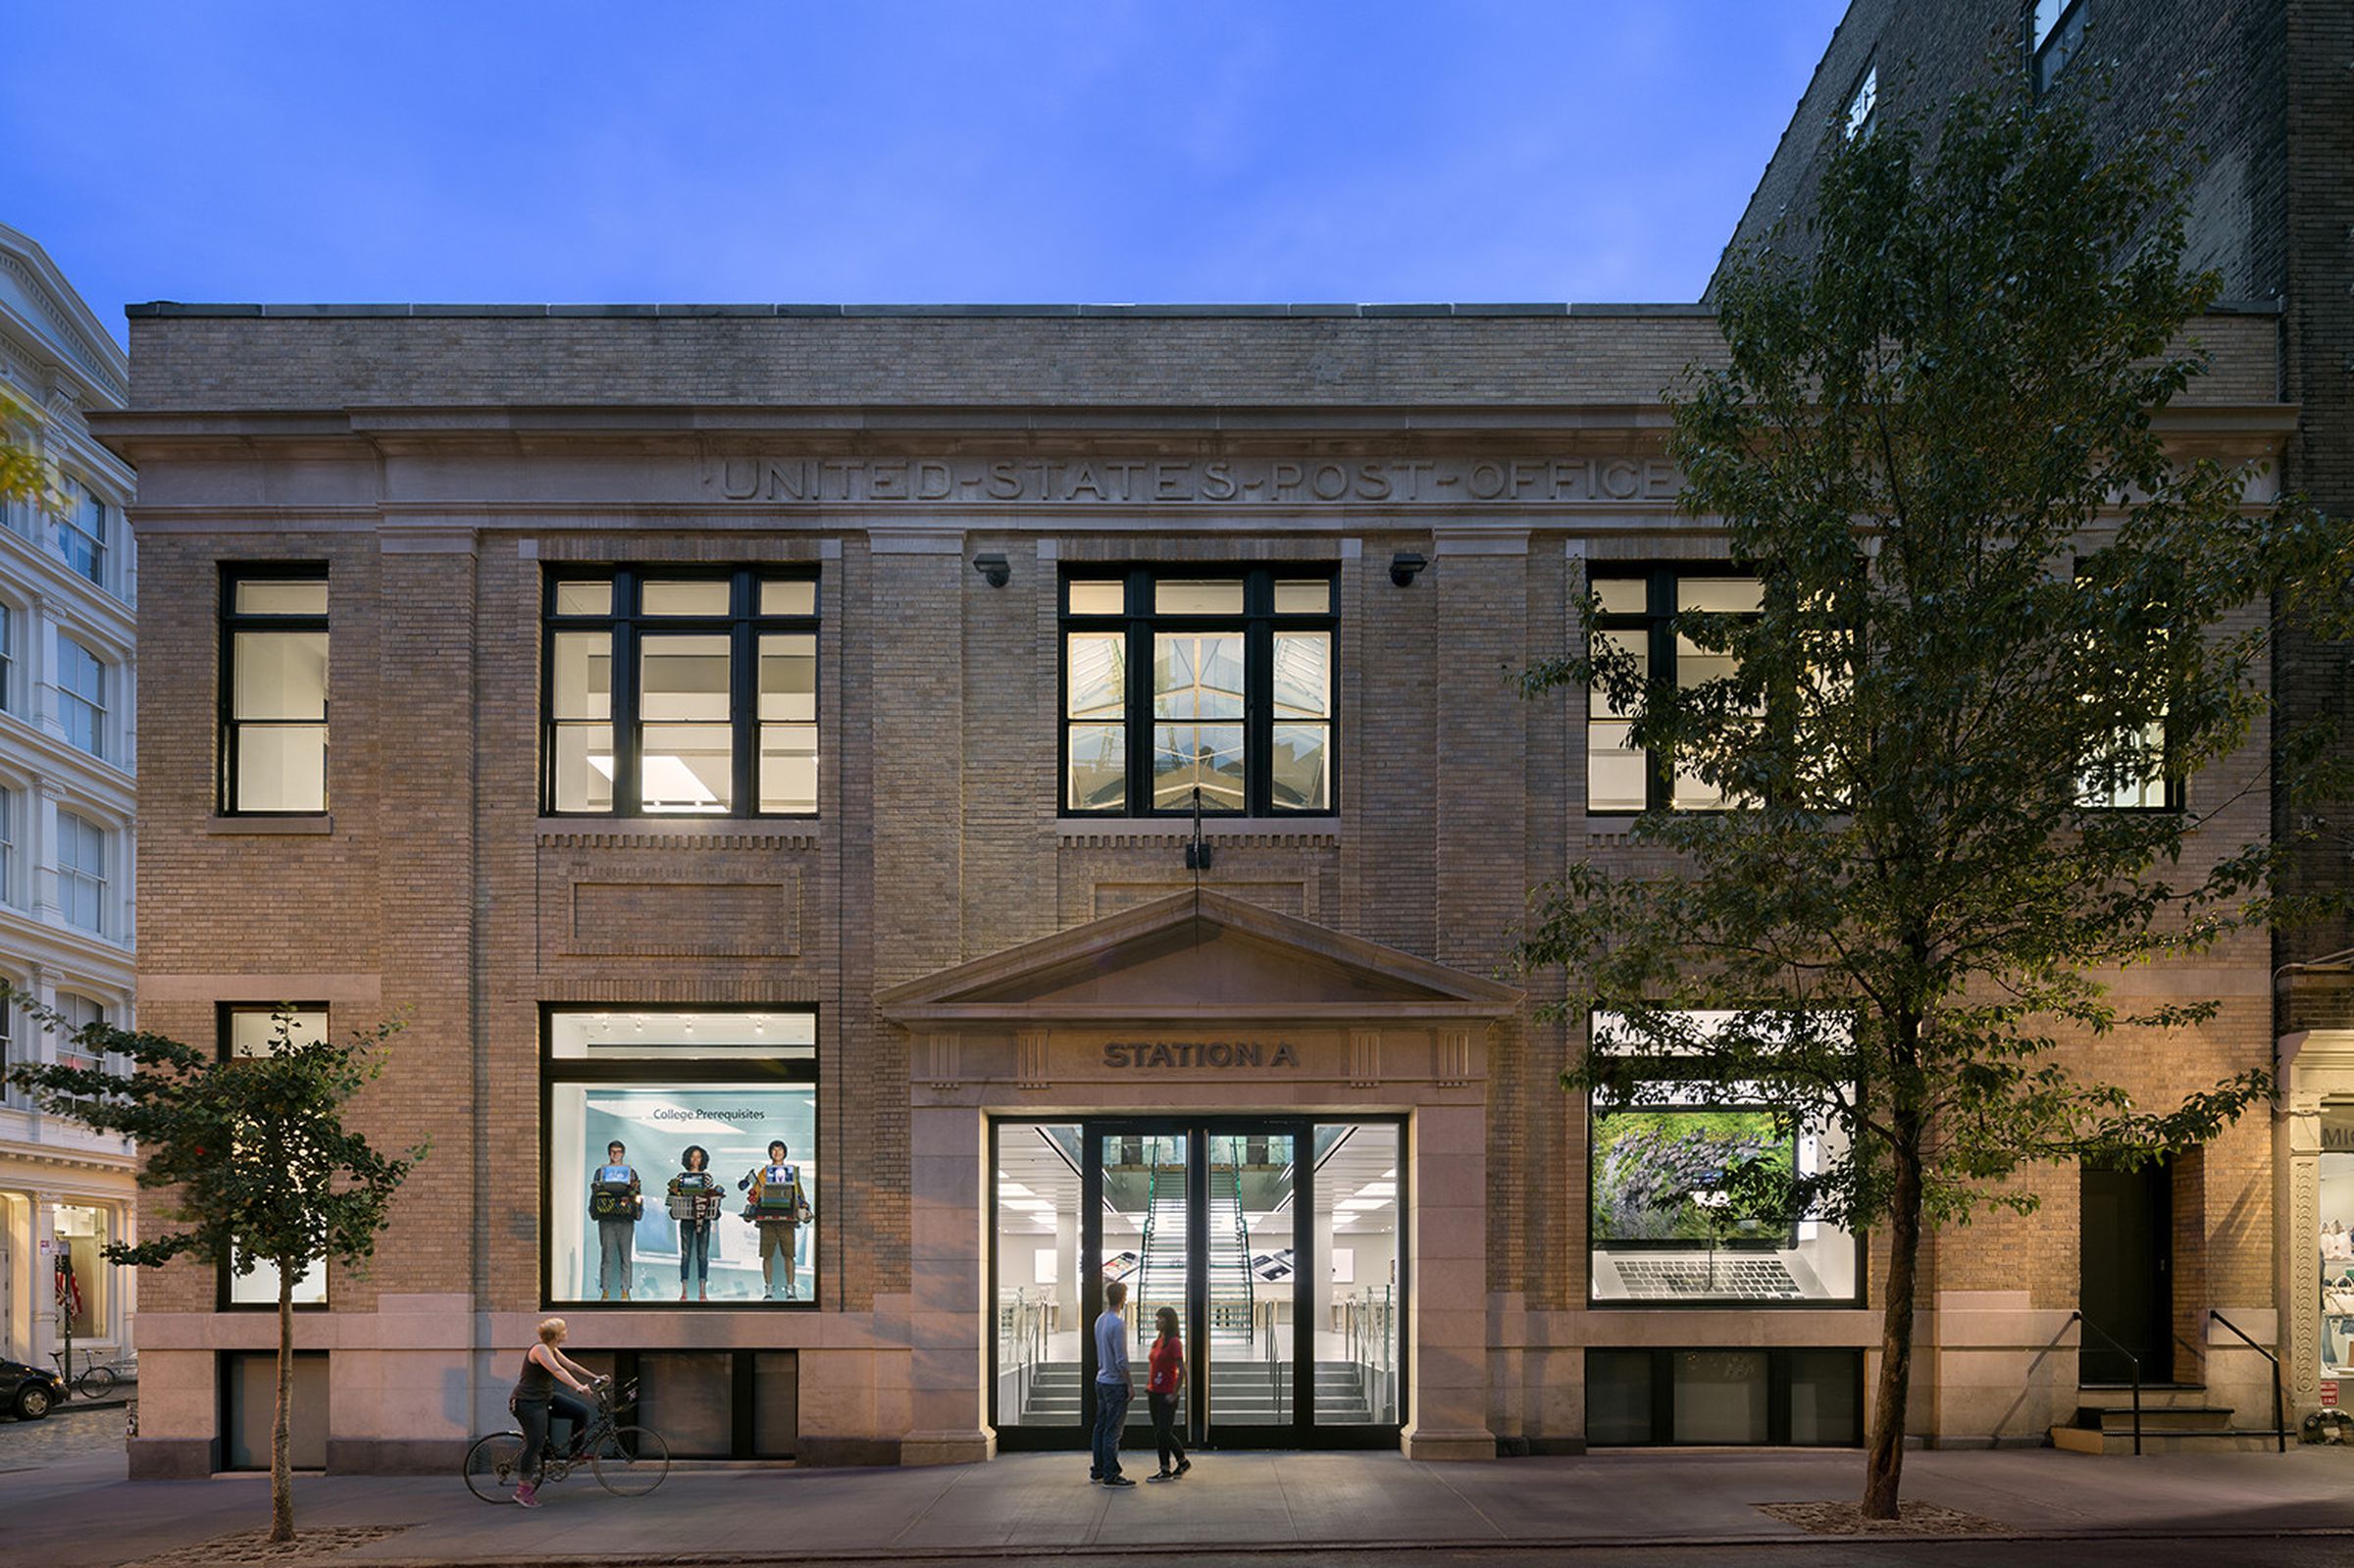 NYC Apple Stores in historic buildings